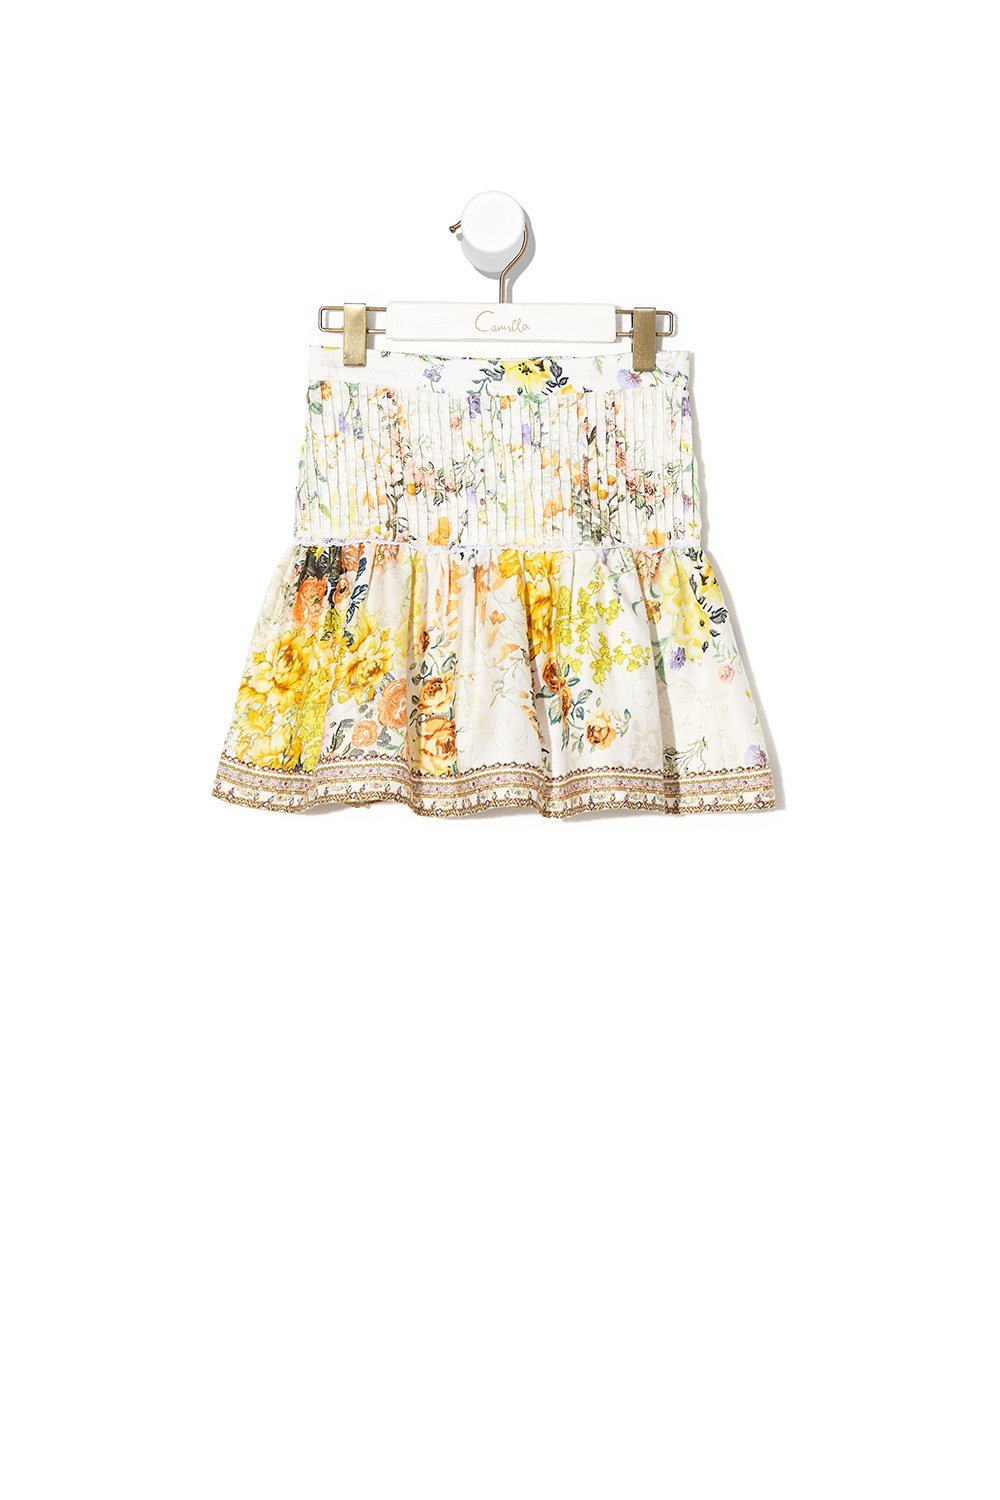 INFANTS SKIRT WITH PINTUCKING IN THE HILLS OF TUSCANY